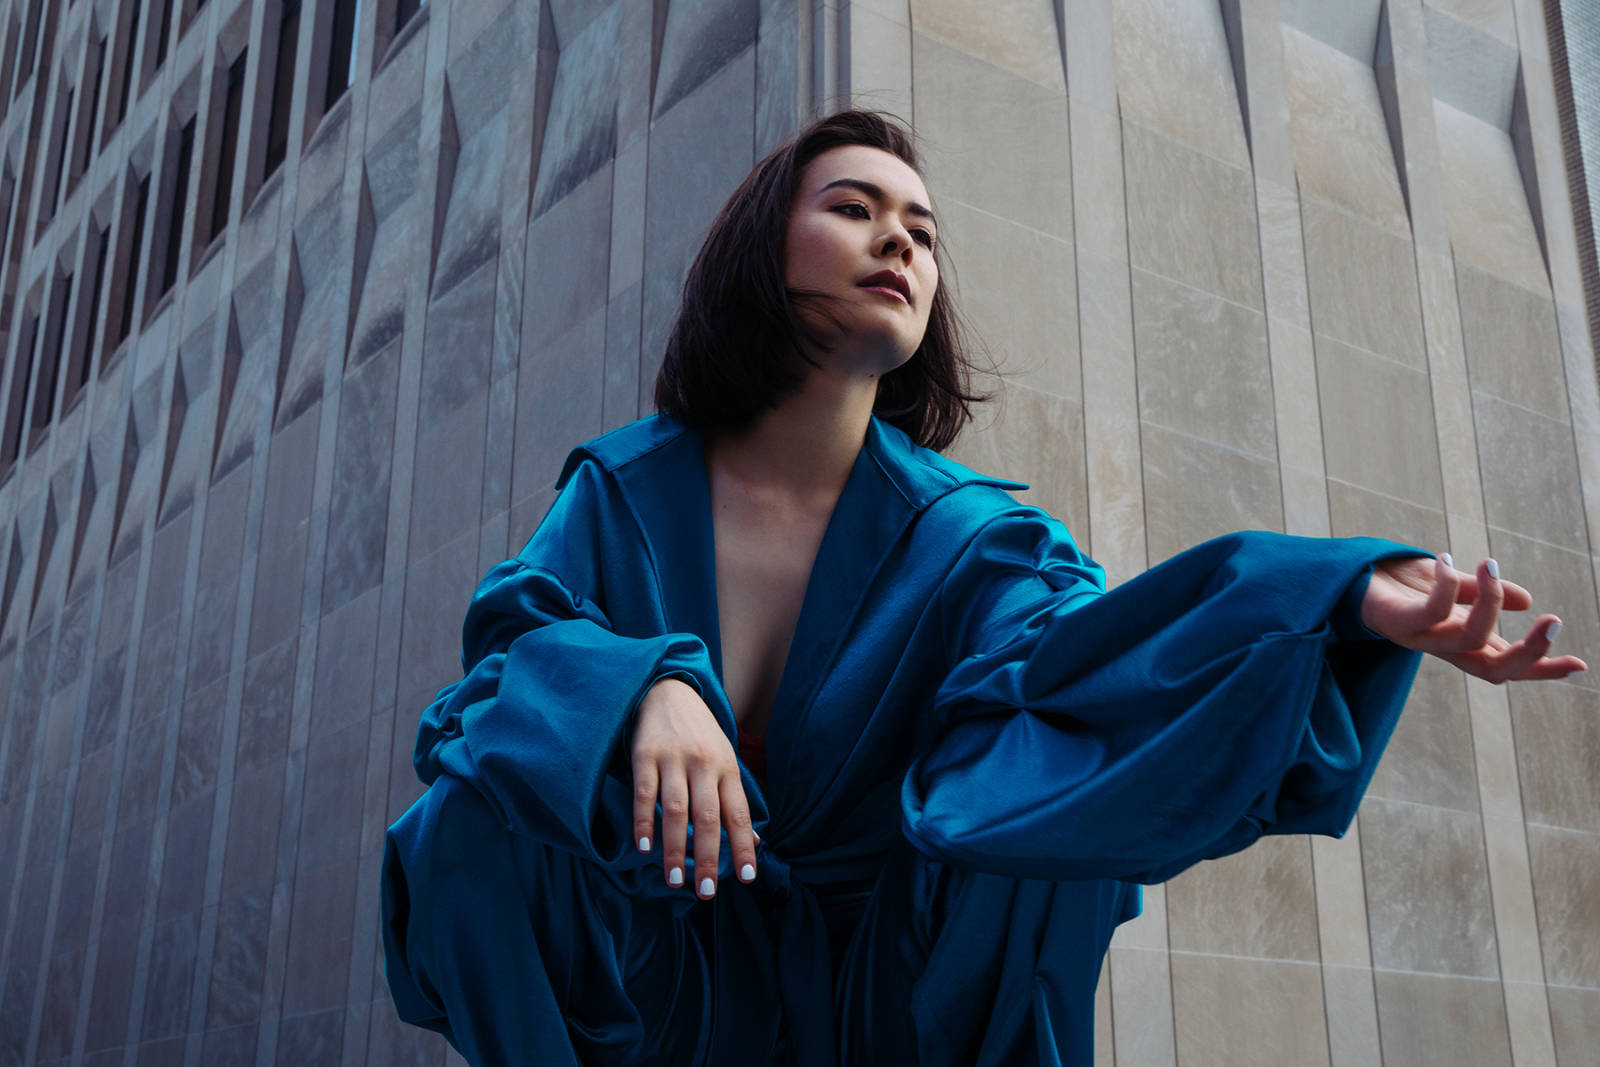 Mitski's Road to Laurel Hell Four years on from 'Be The Cowboy' - where is Mitski now?